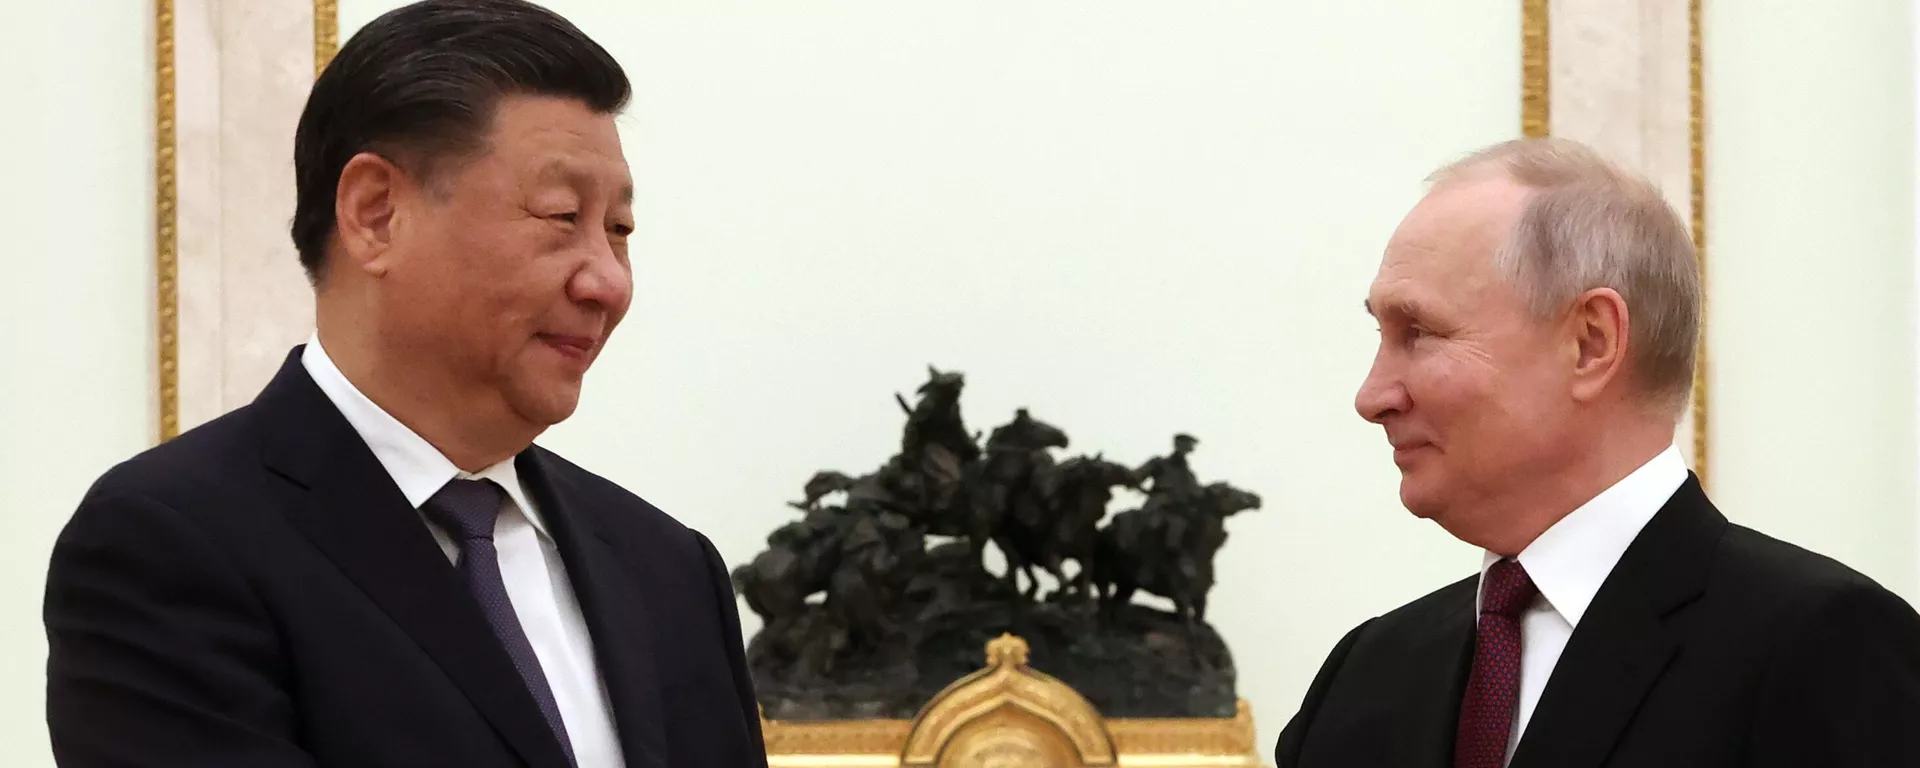 Chinese President Xi Jinping and Russian President Vladimir Putin shake hands during their meeting at the Kremlin in Moscow, Russia. - Sputnik International, 1920, 22.03.2023